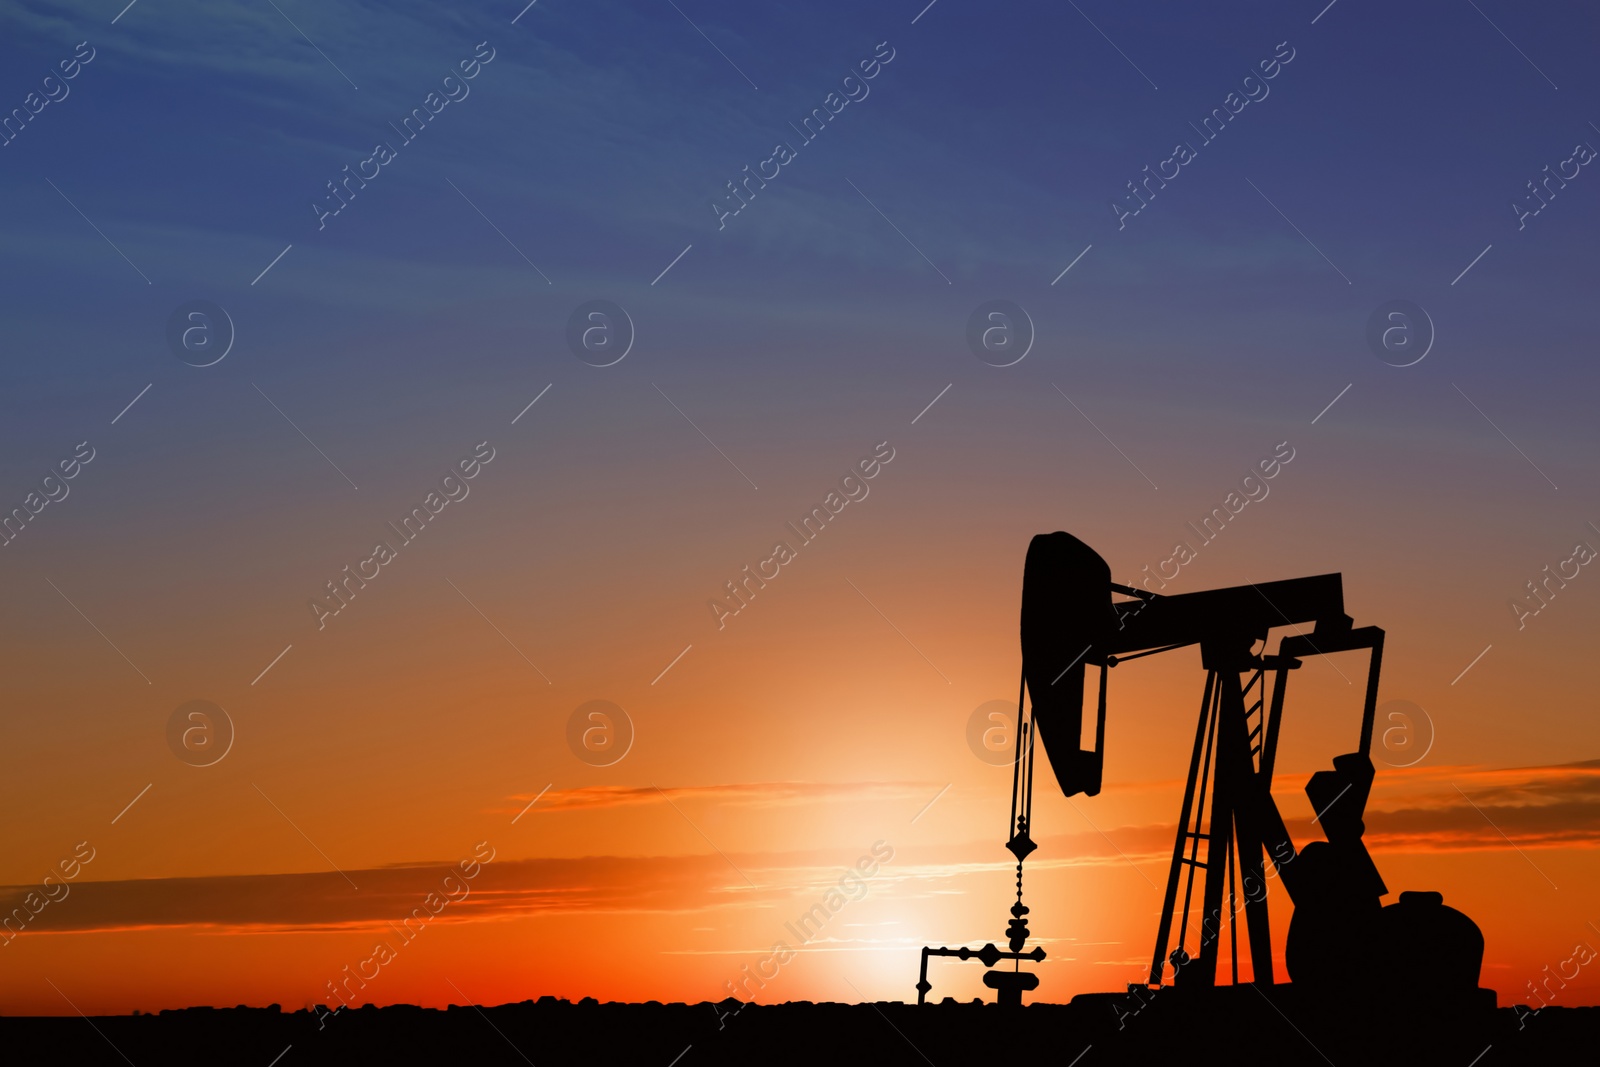 Image of Silhouette of crude oil pump at sunset. Space for text